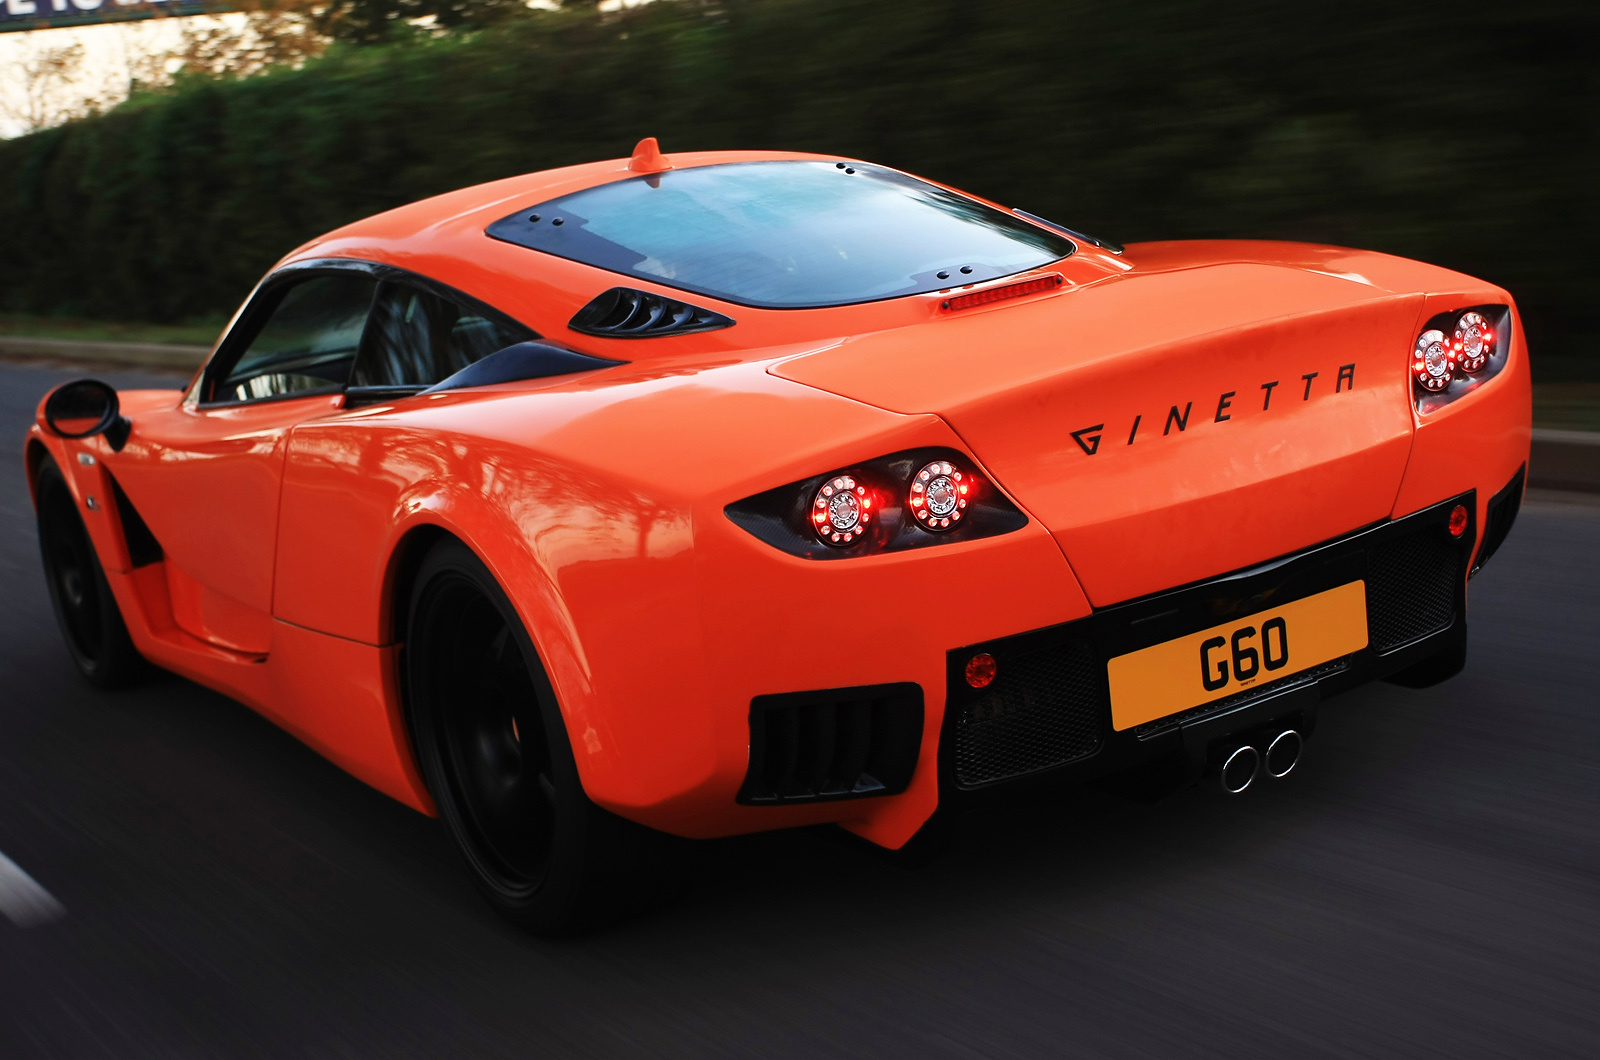 Ginetta G60 12 15 Review Autocar